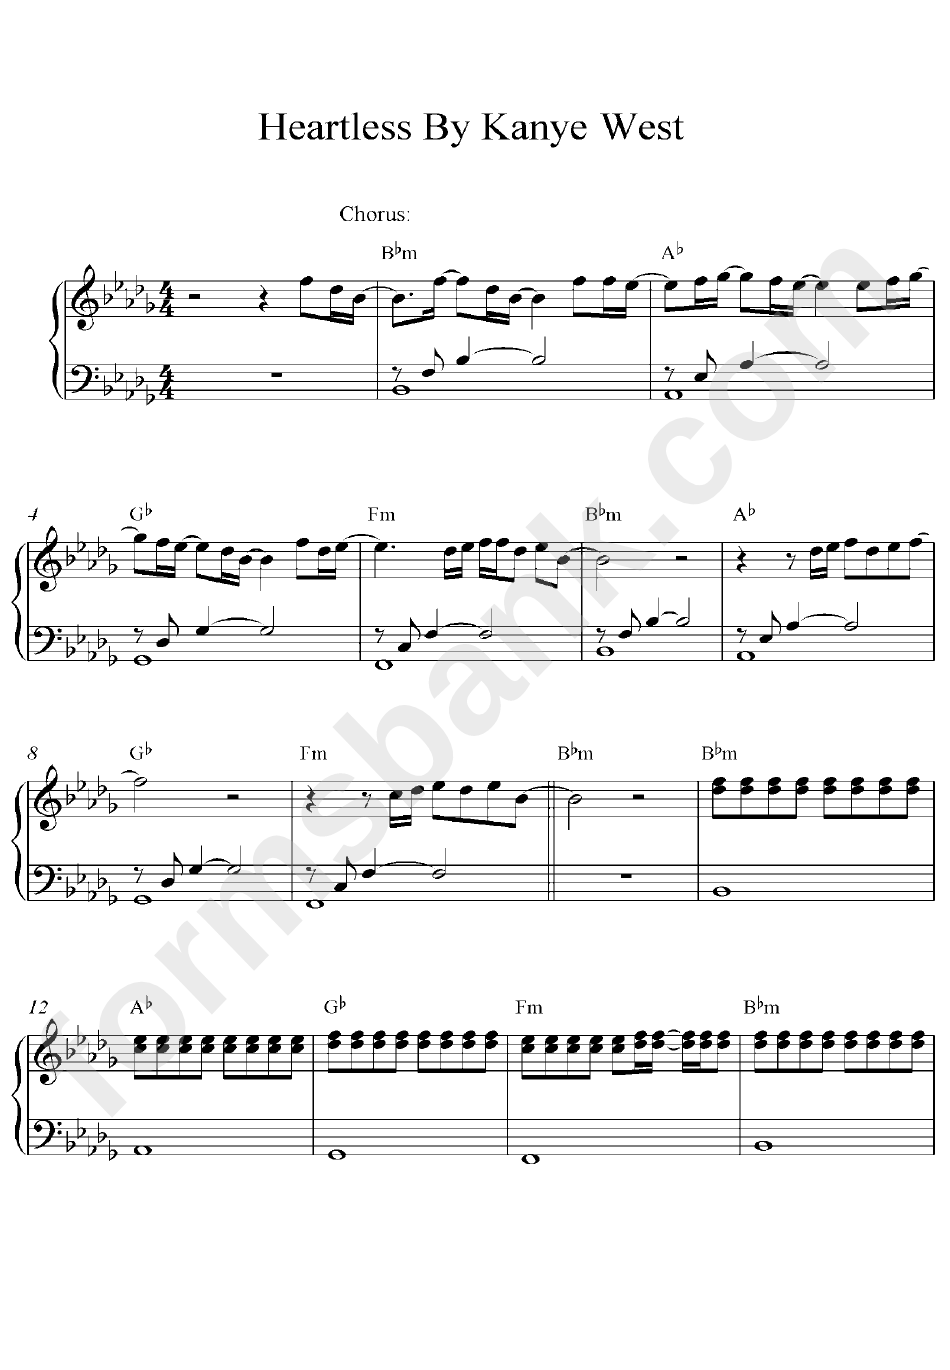 Heartless By Kanye West Piano Sheet Music